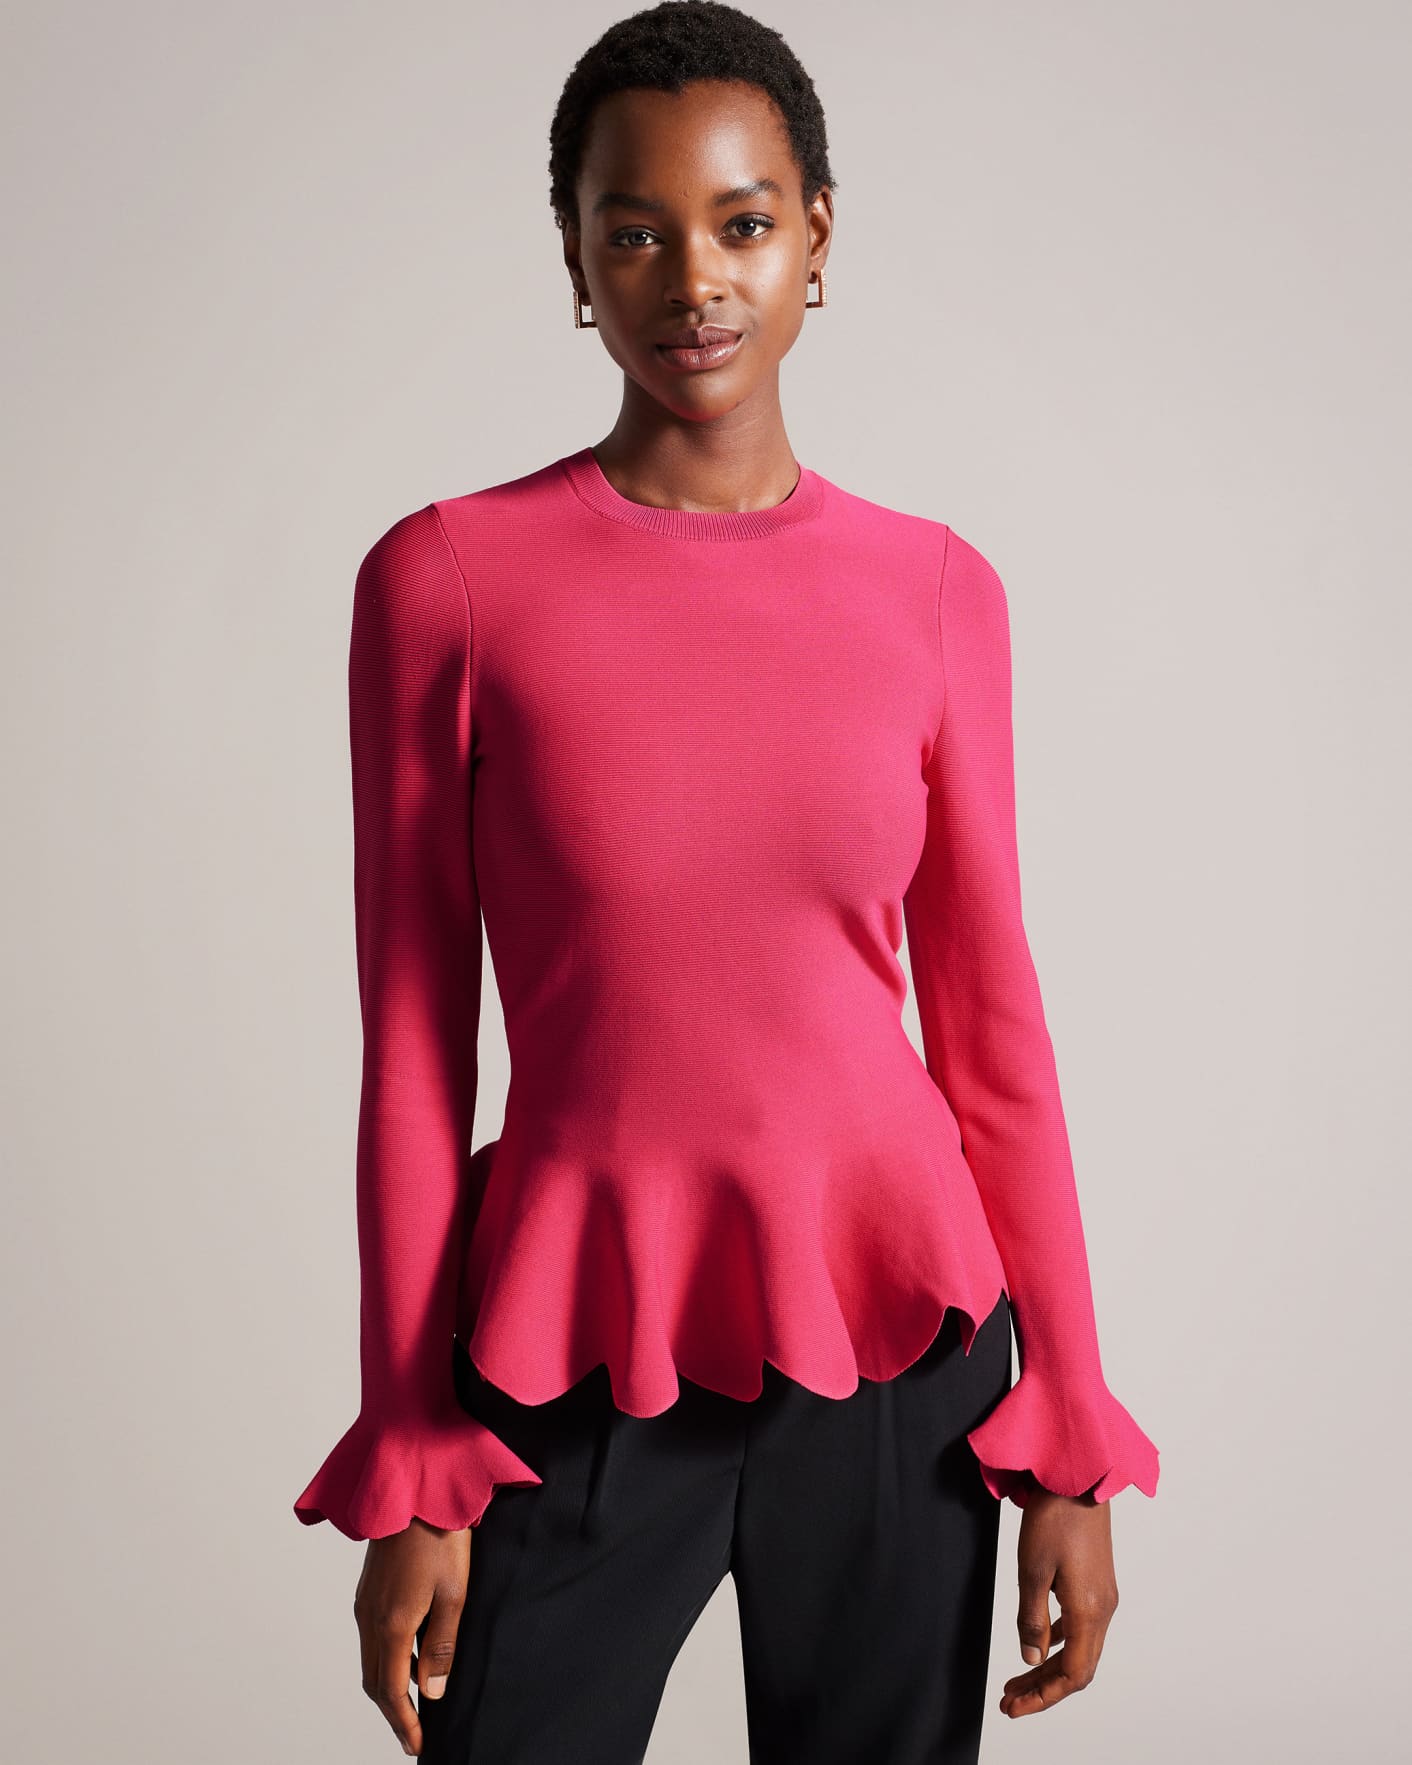 LILLYYY - BRT-PINK | Long Sleeve Tops | Ted Baker AU